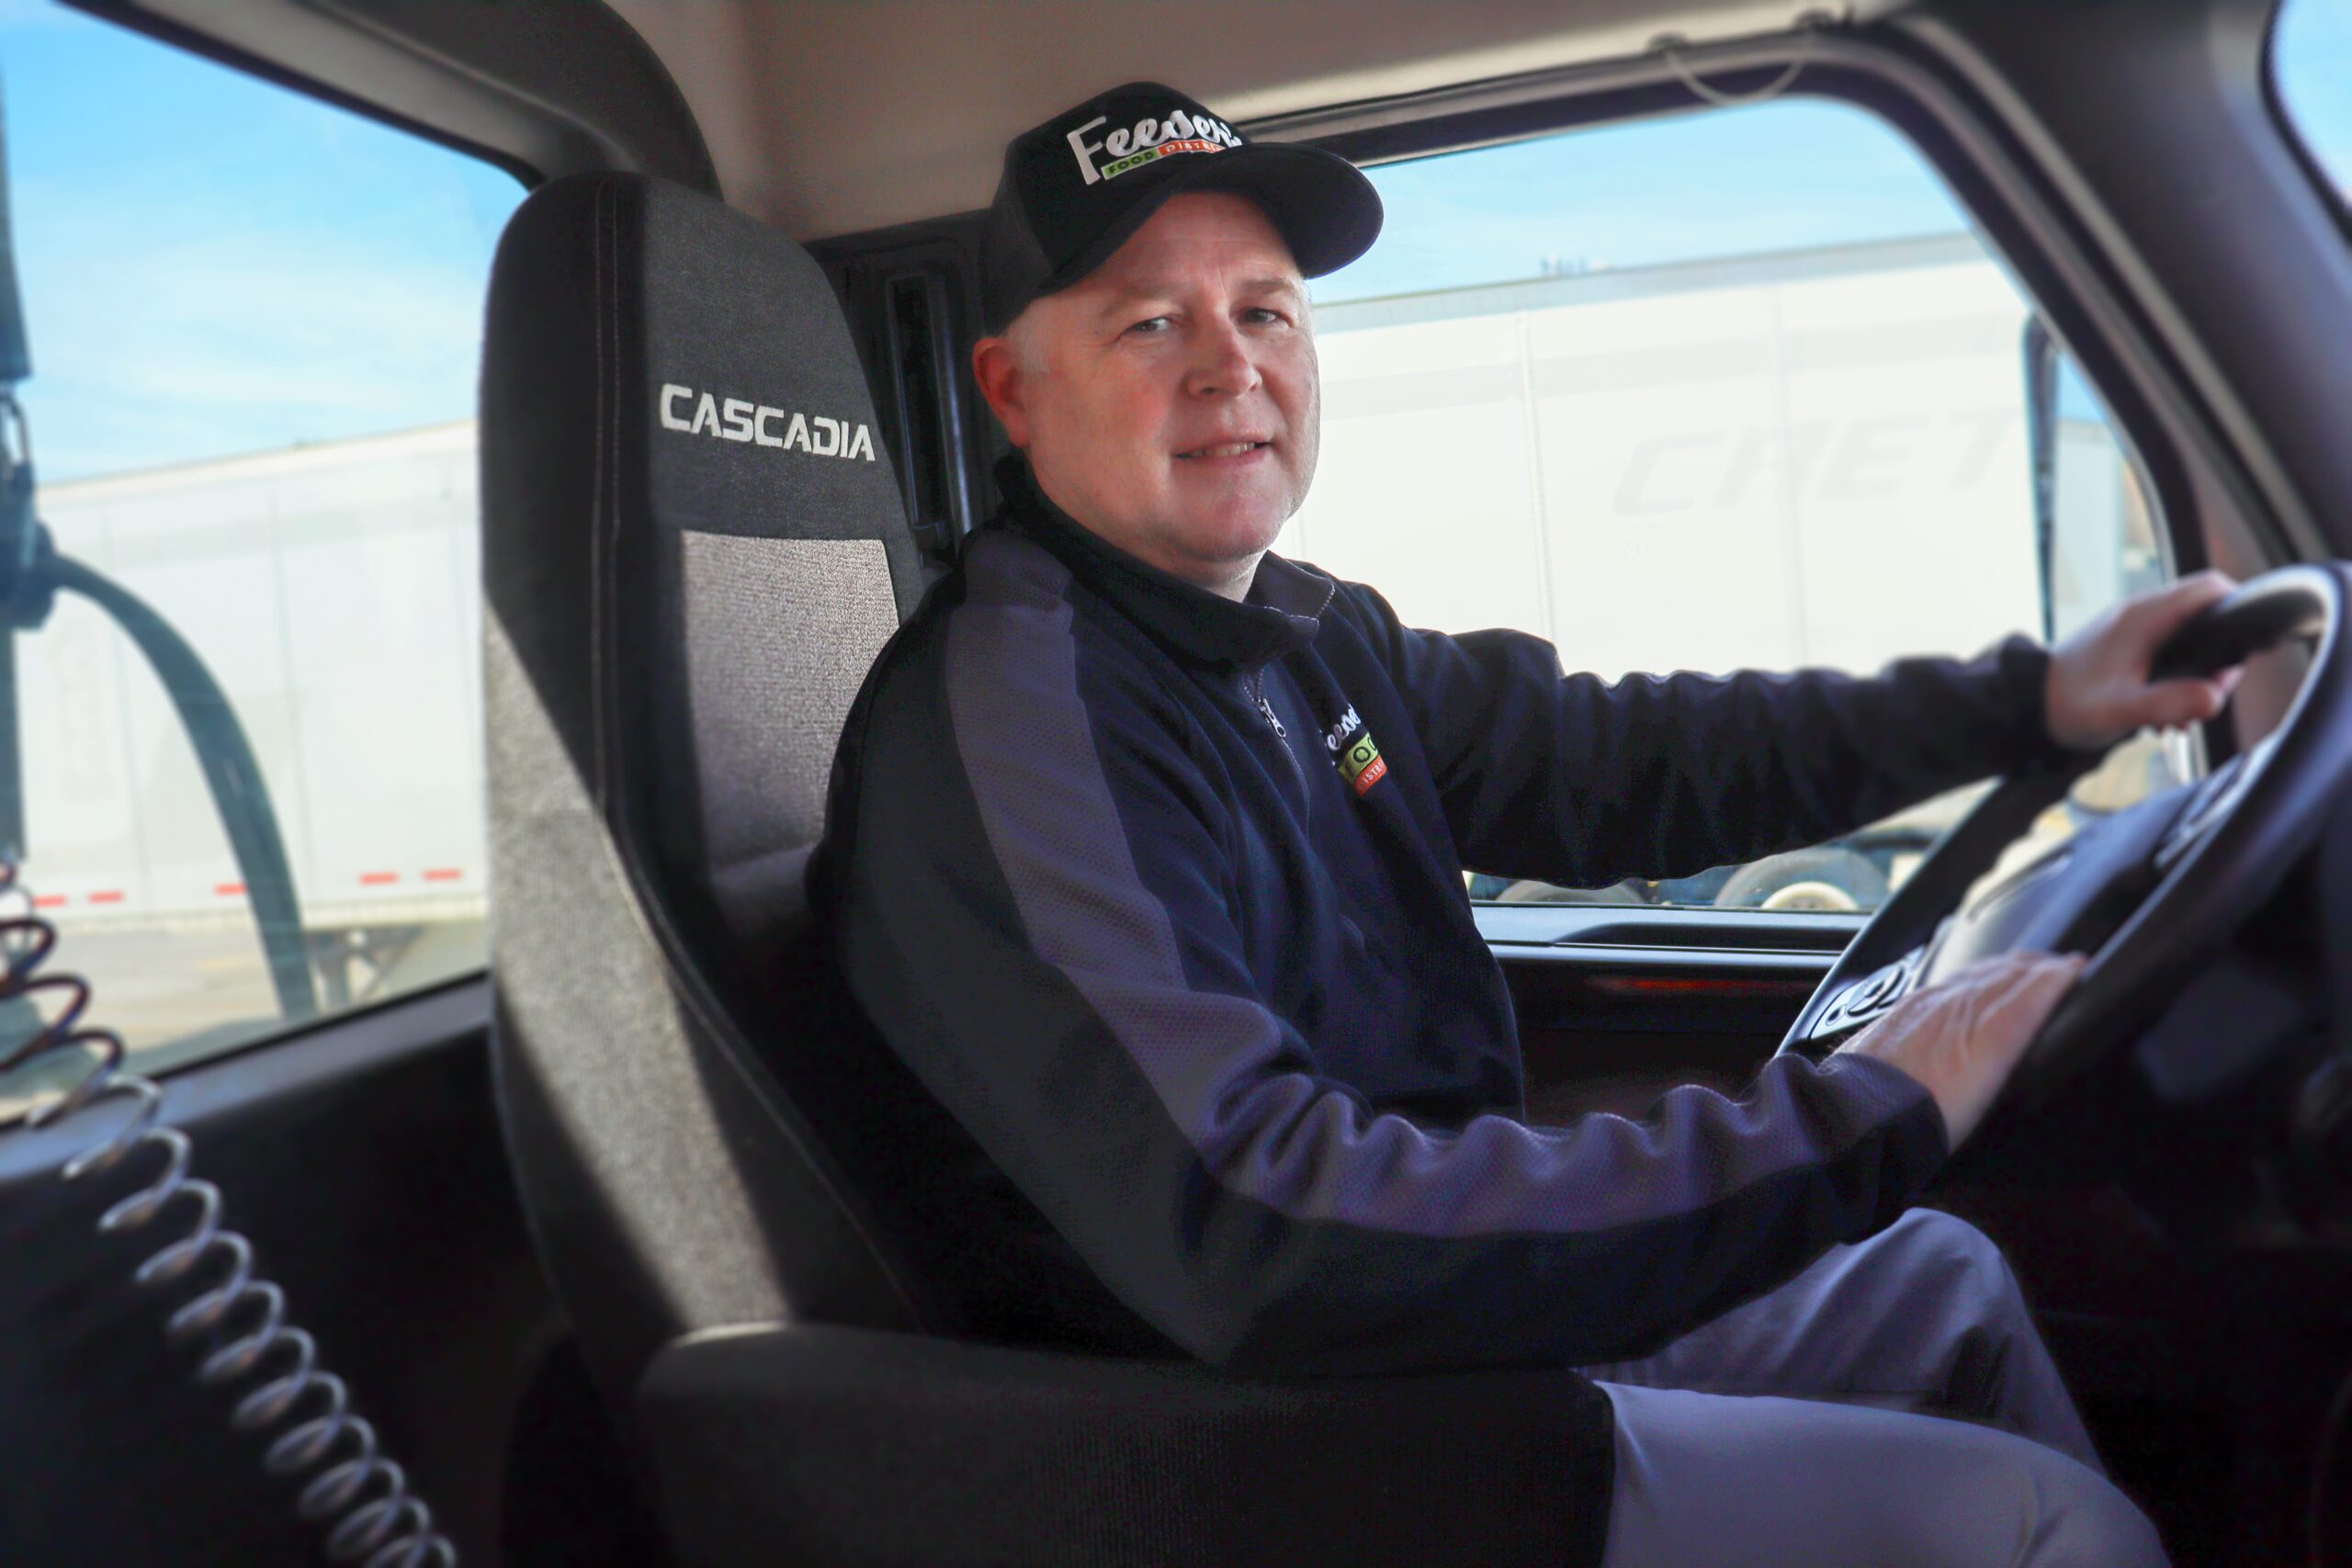 a man smiling and sitting in the driver's seat of a truck wearing a Feeser's quarter zip and baseball cap